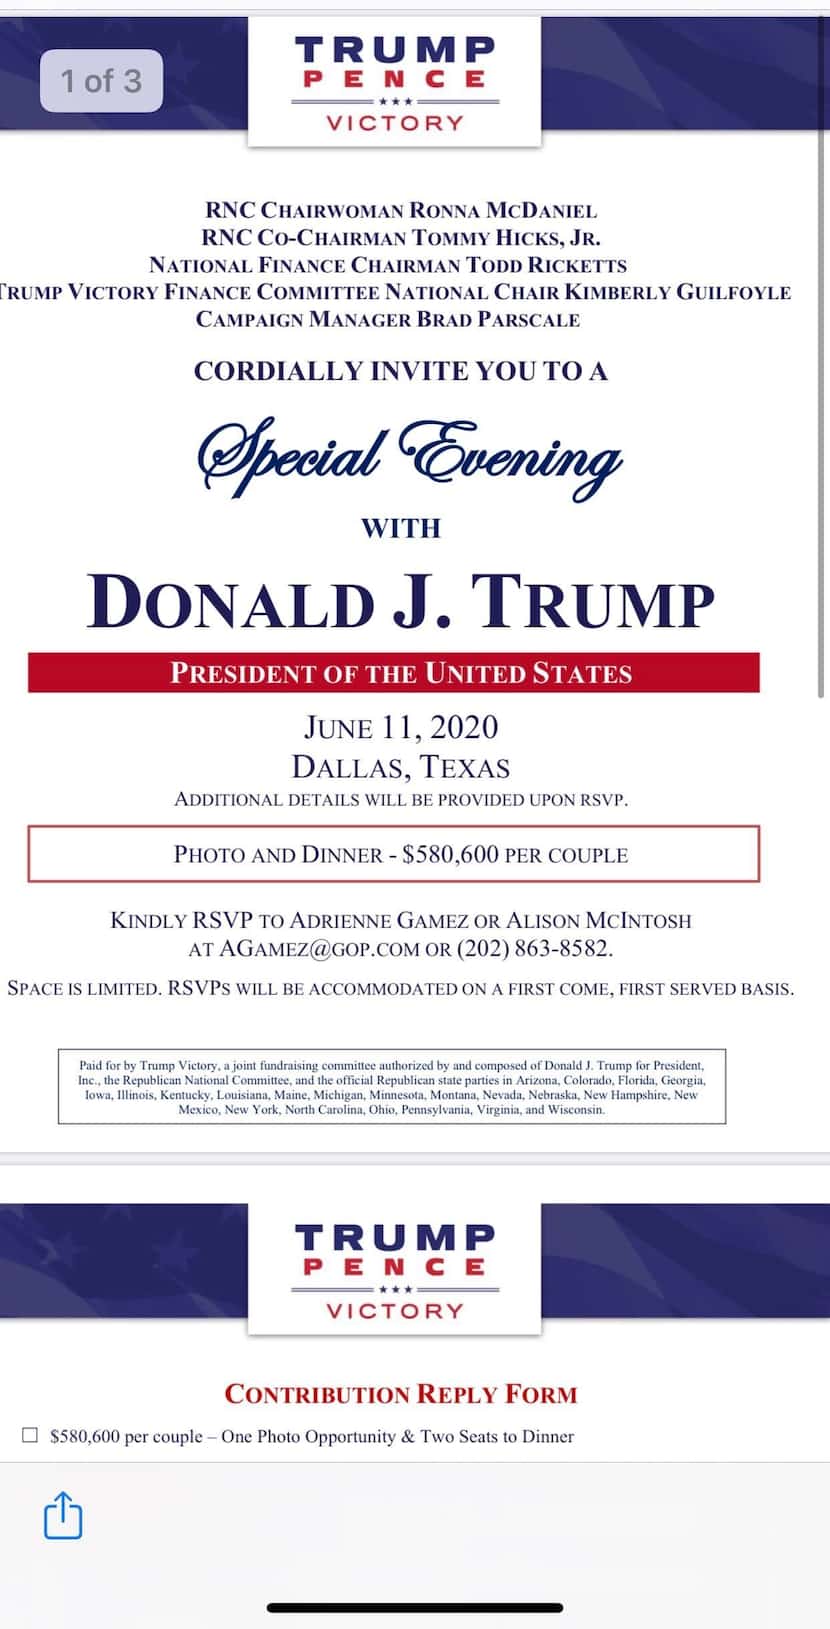 Invitation obtained by The Dallas Morning News to a Trump Victory fund-raising dinner with...